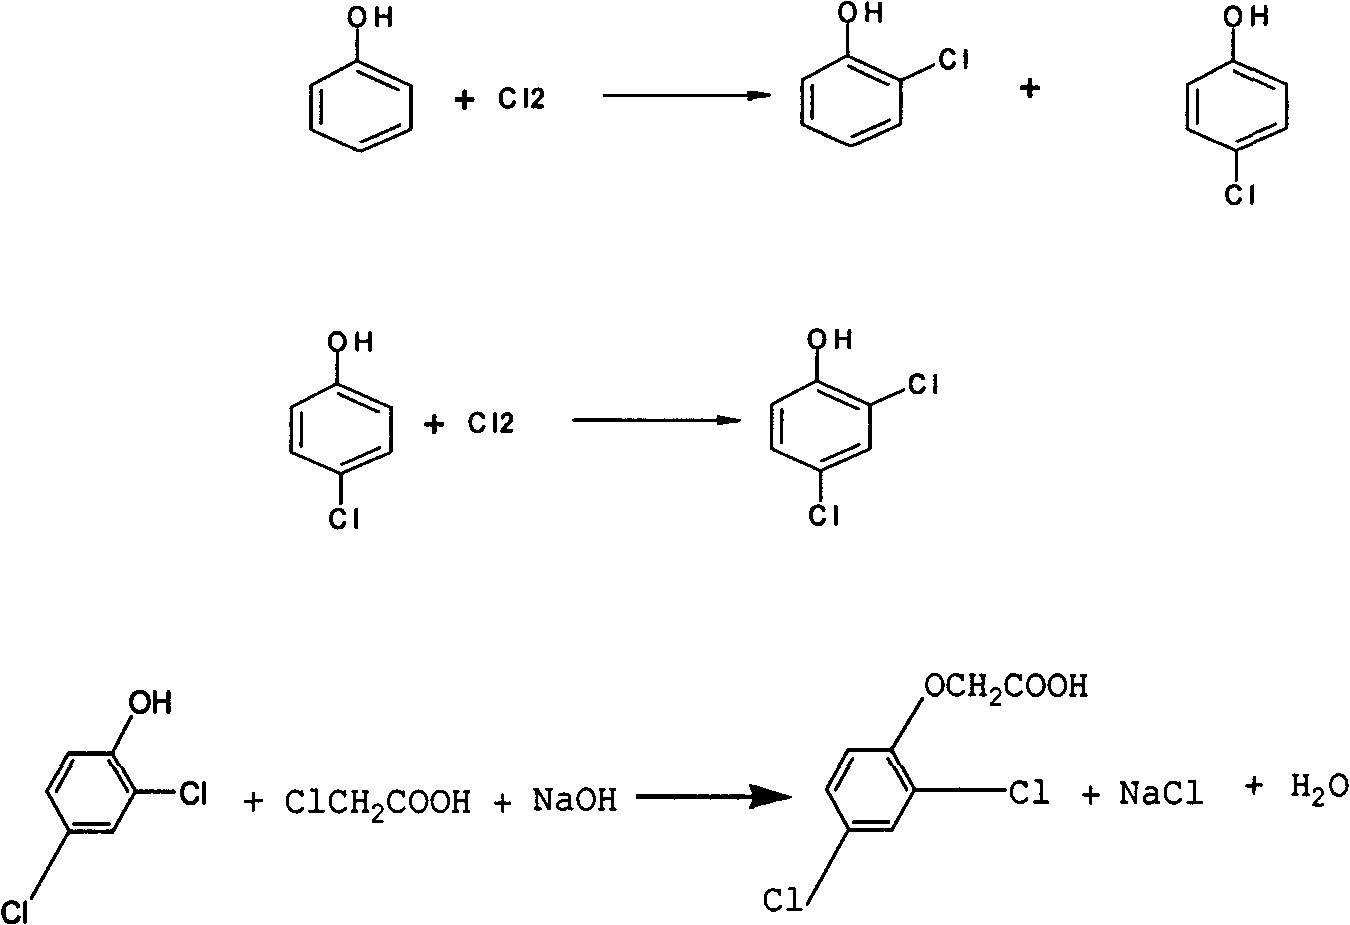 Process for preparing 2,4-dichlorphenoxyacetic acid with high quality